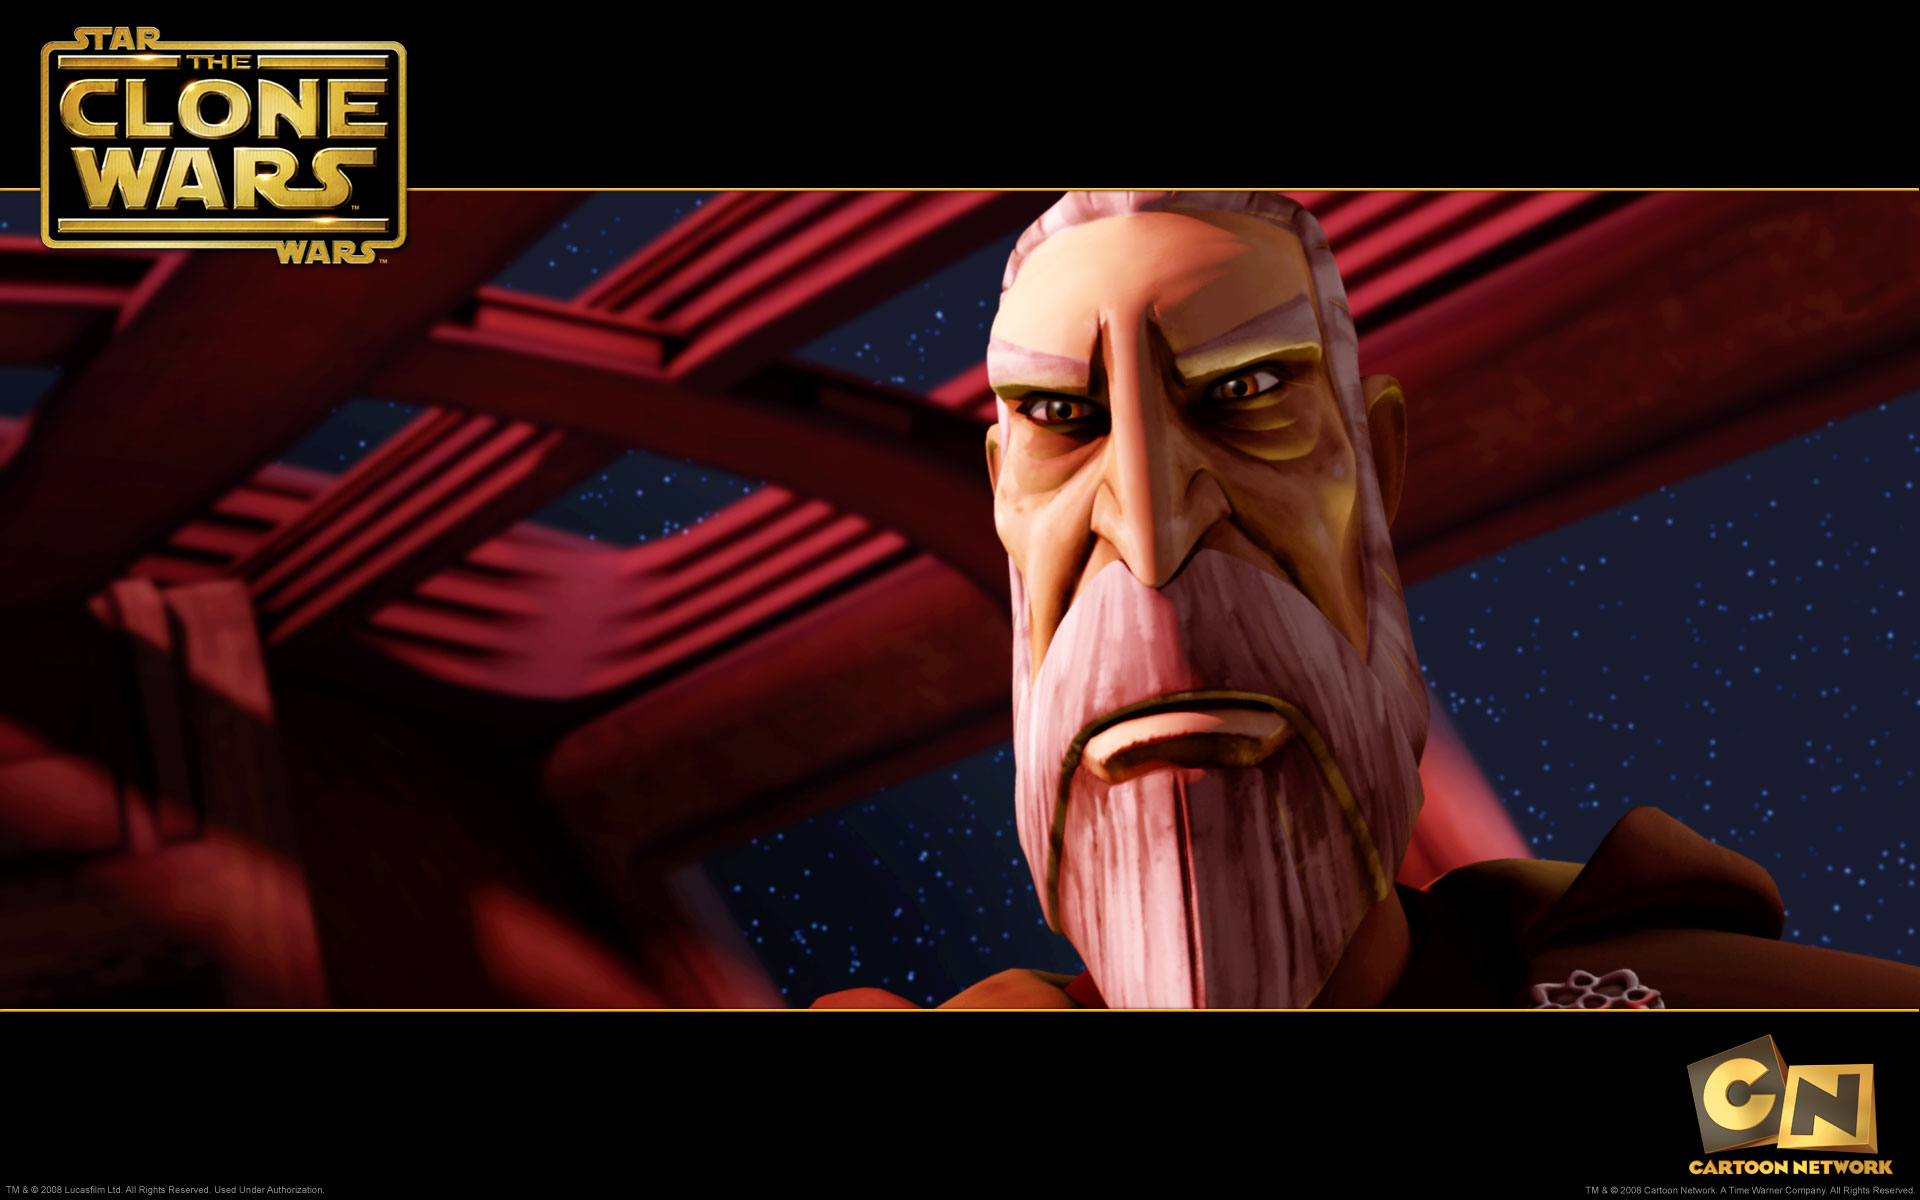 Wallpaper Picture Of Count Dooku From Star Wars The Clone